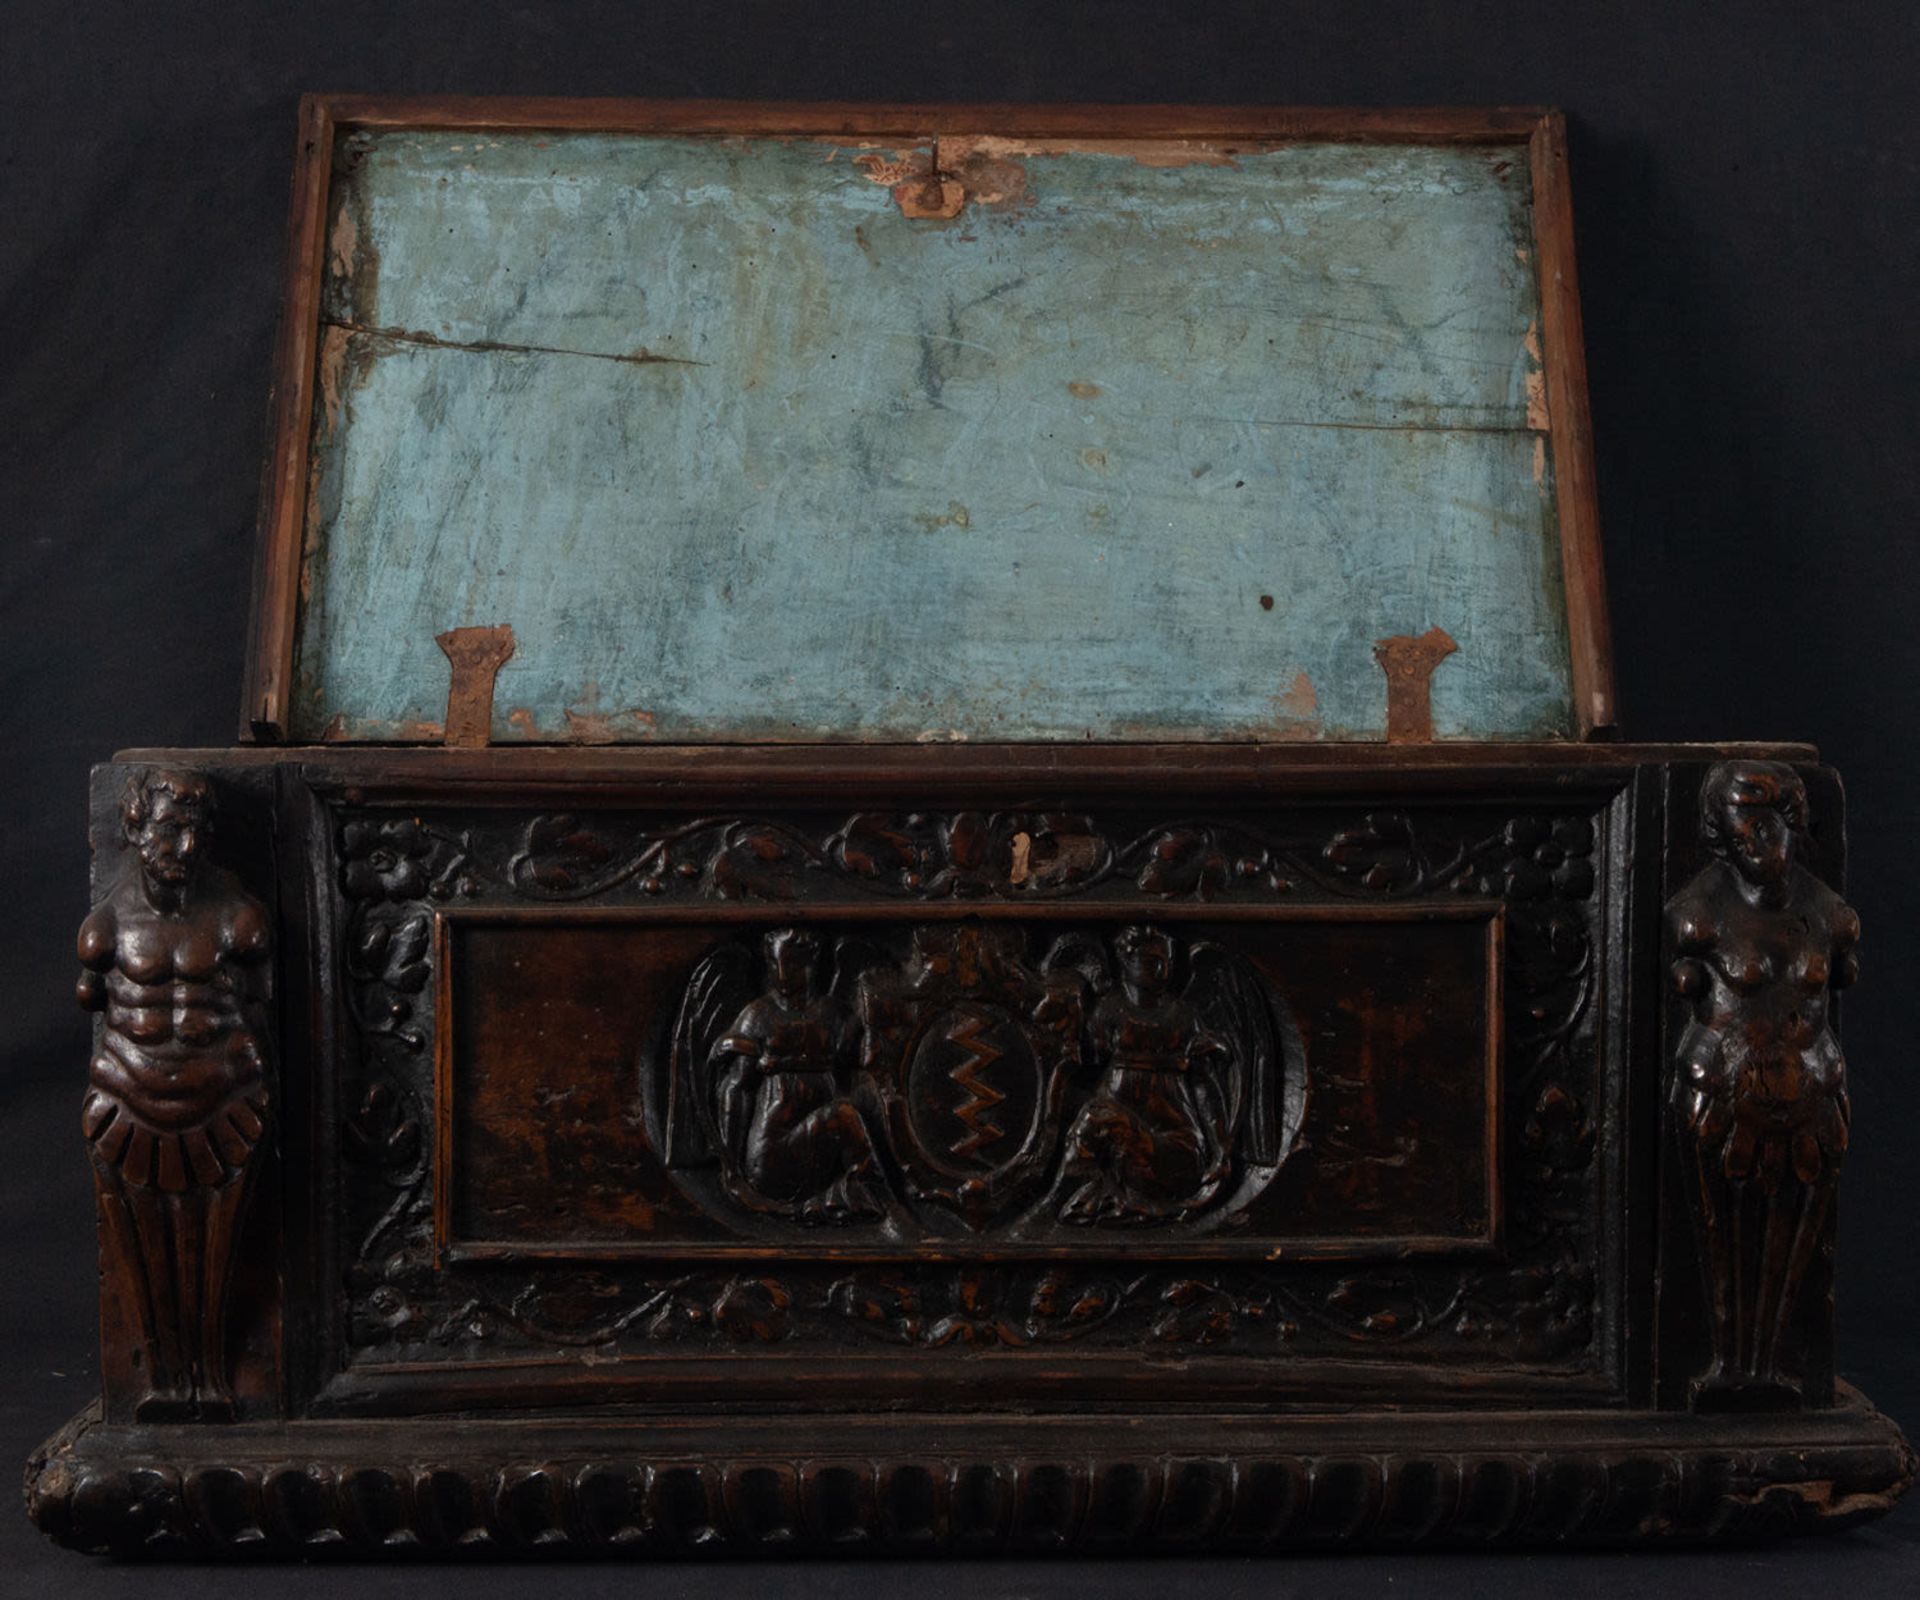 Large and Important Renaissance Chest, Spain or Italy, 16th century - Image 4 of 7